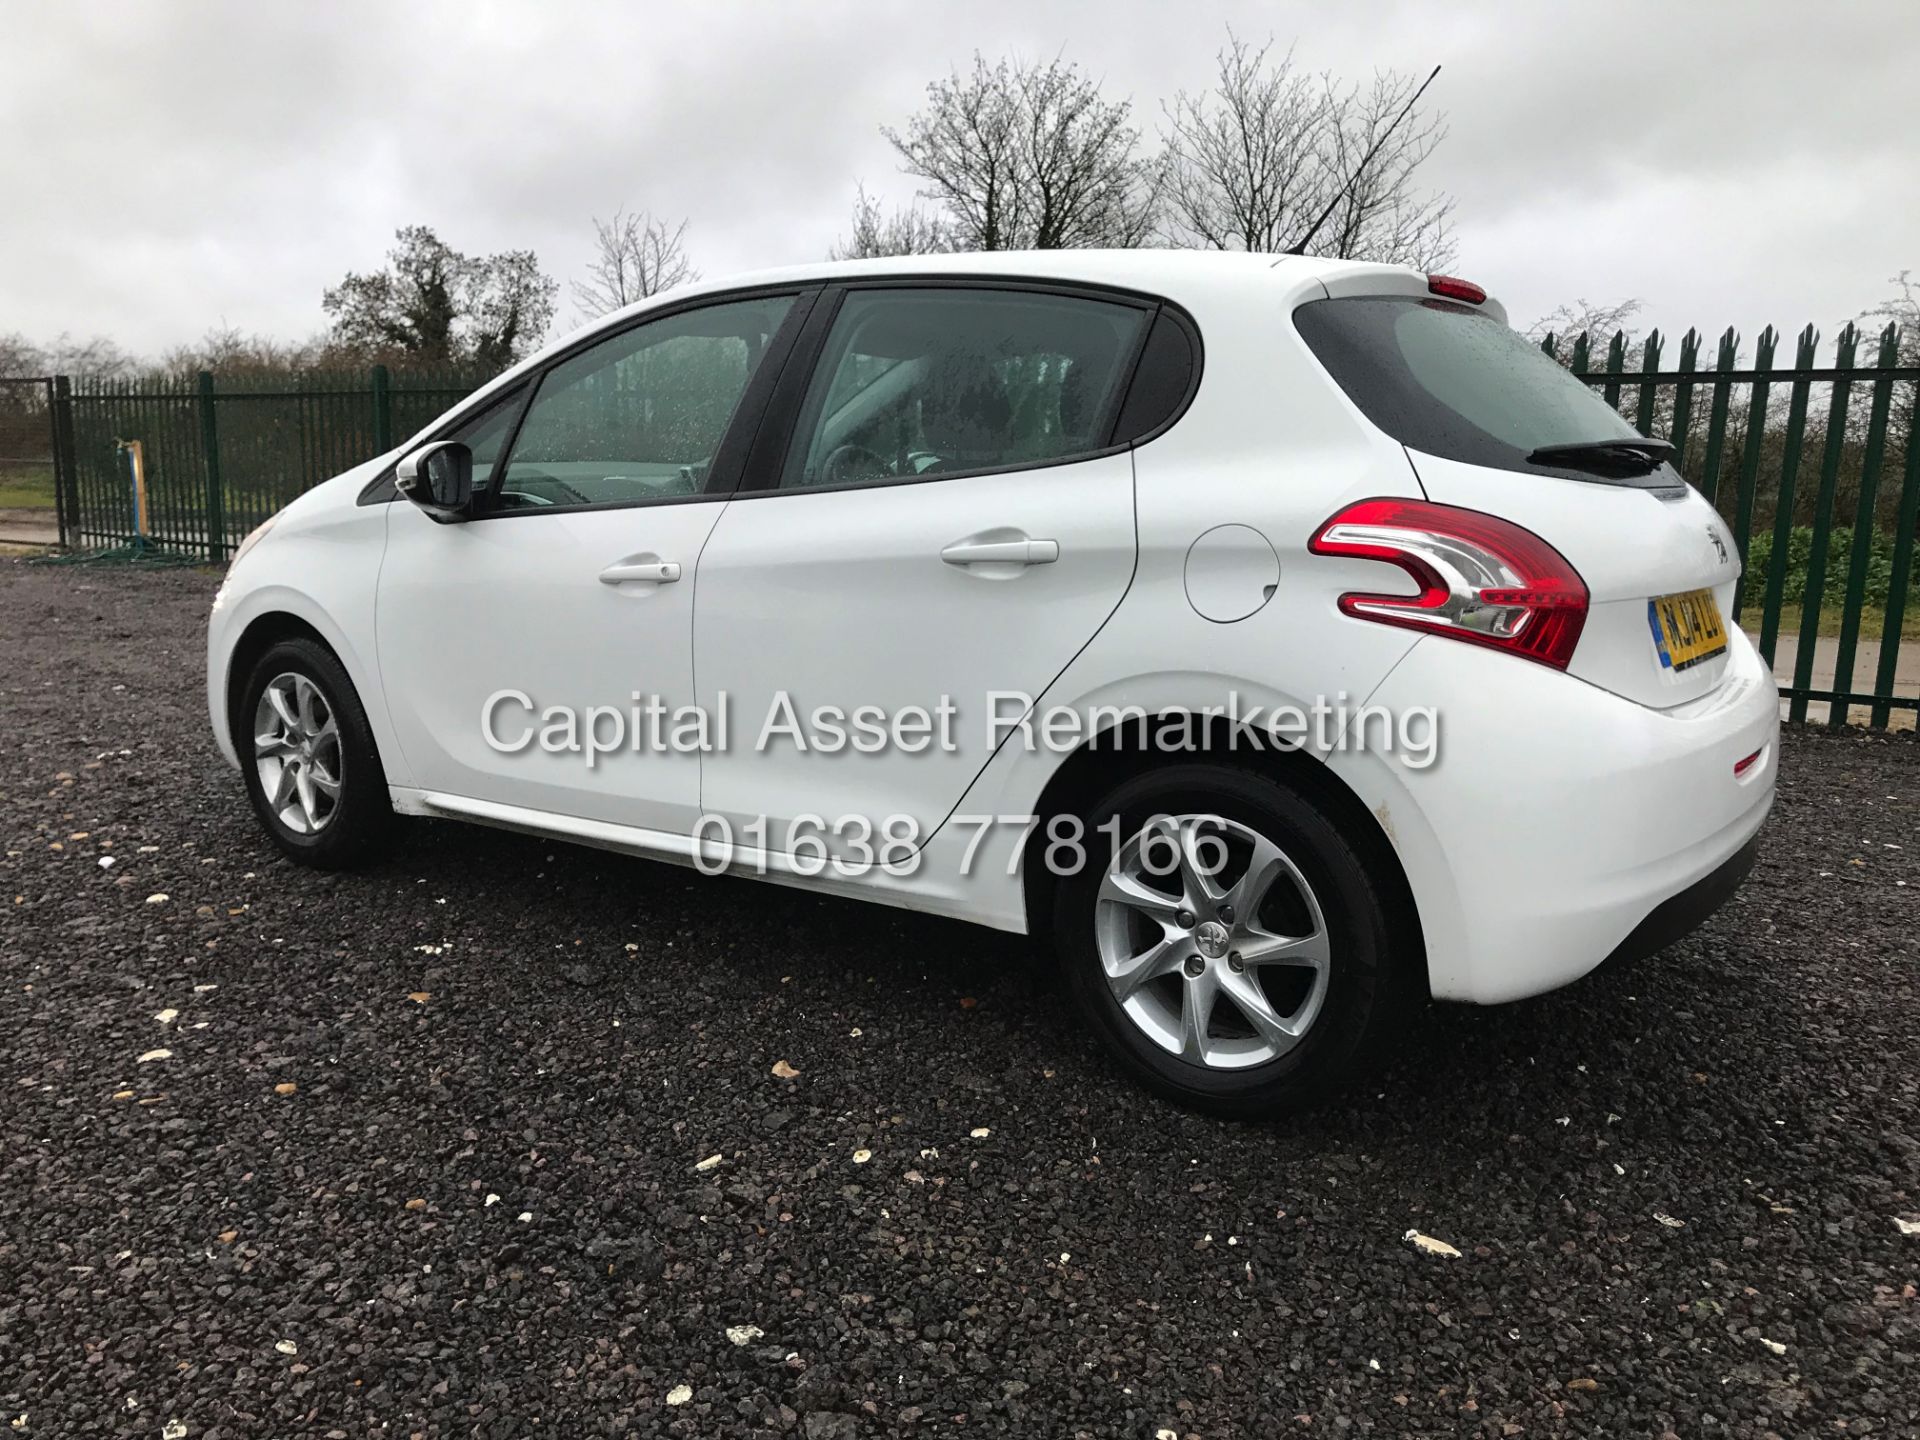 (ON SALE) PEUGEOT 208 1.4HDI "ACTIVE" 1 PREVIOUS KEEPER FSH (14 REG) RECENT SERVICE-AIR CON *NO VAT* - Image 7 of 23